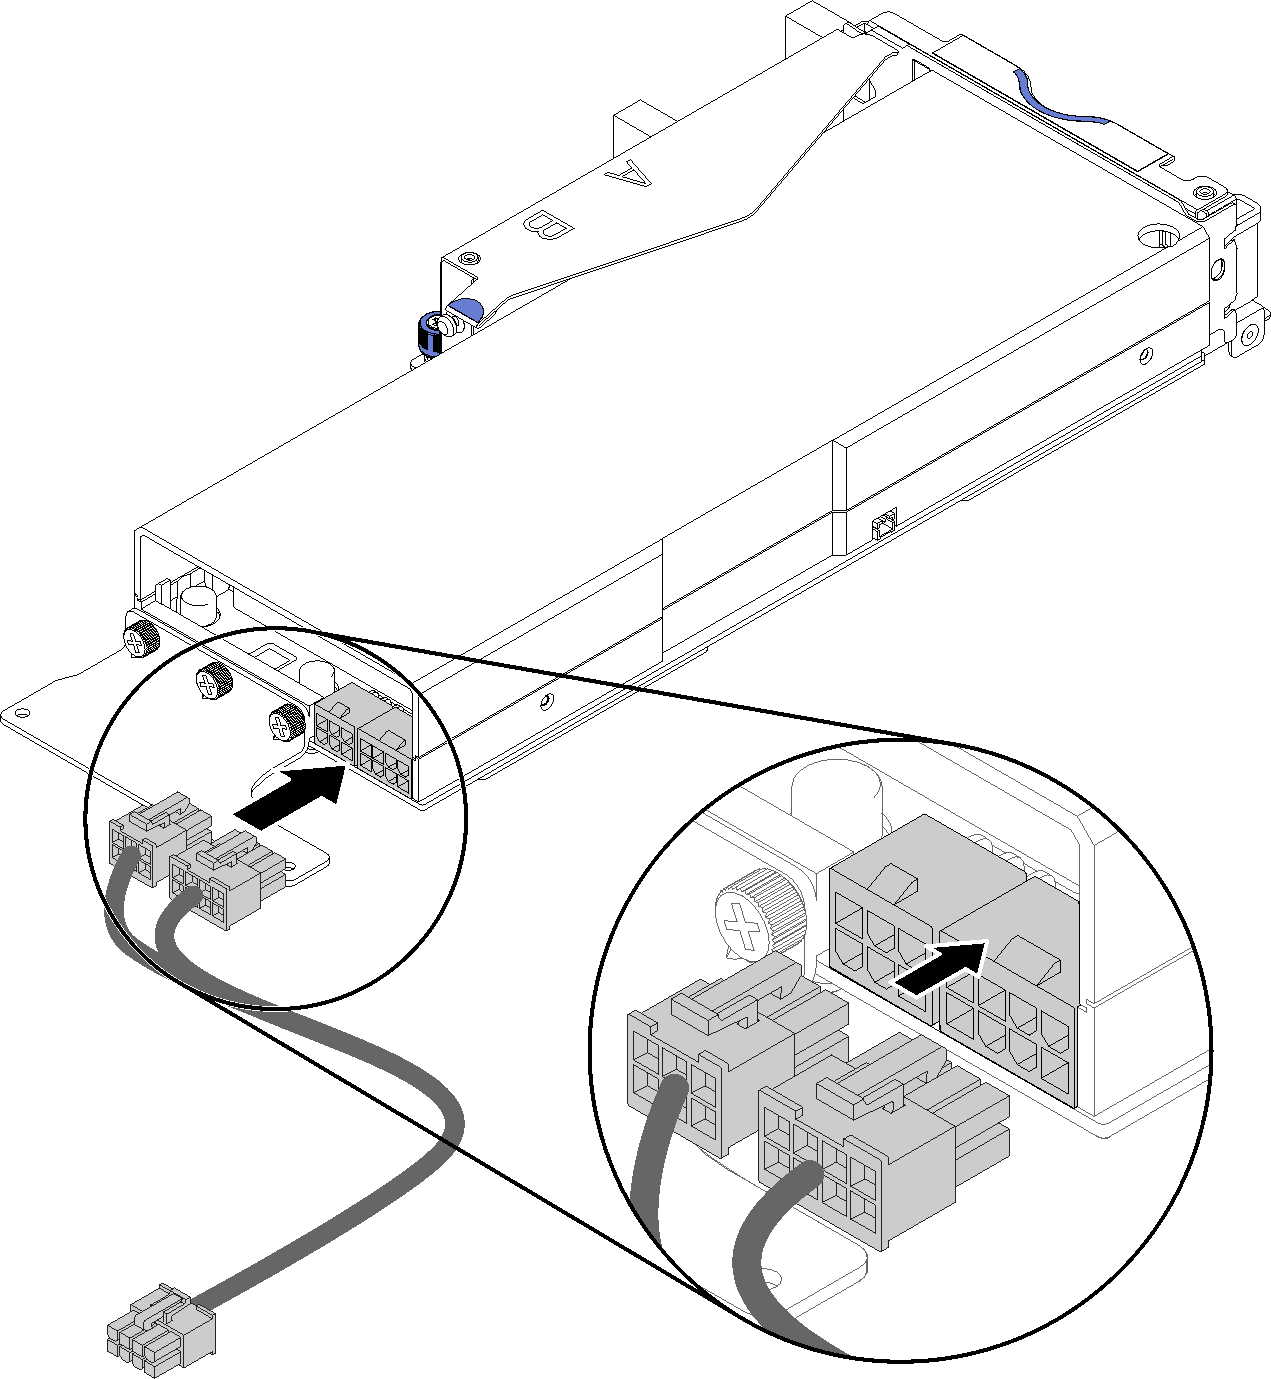 Connecting the auxiliary power cable to the adapter connectors